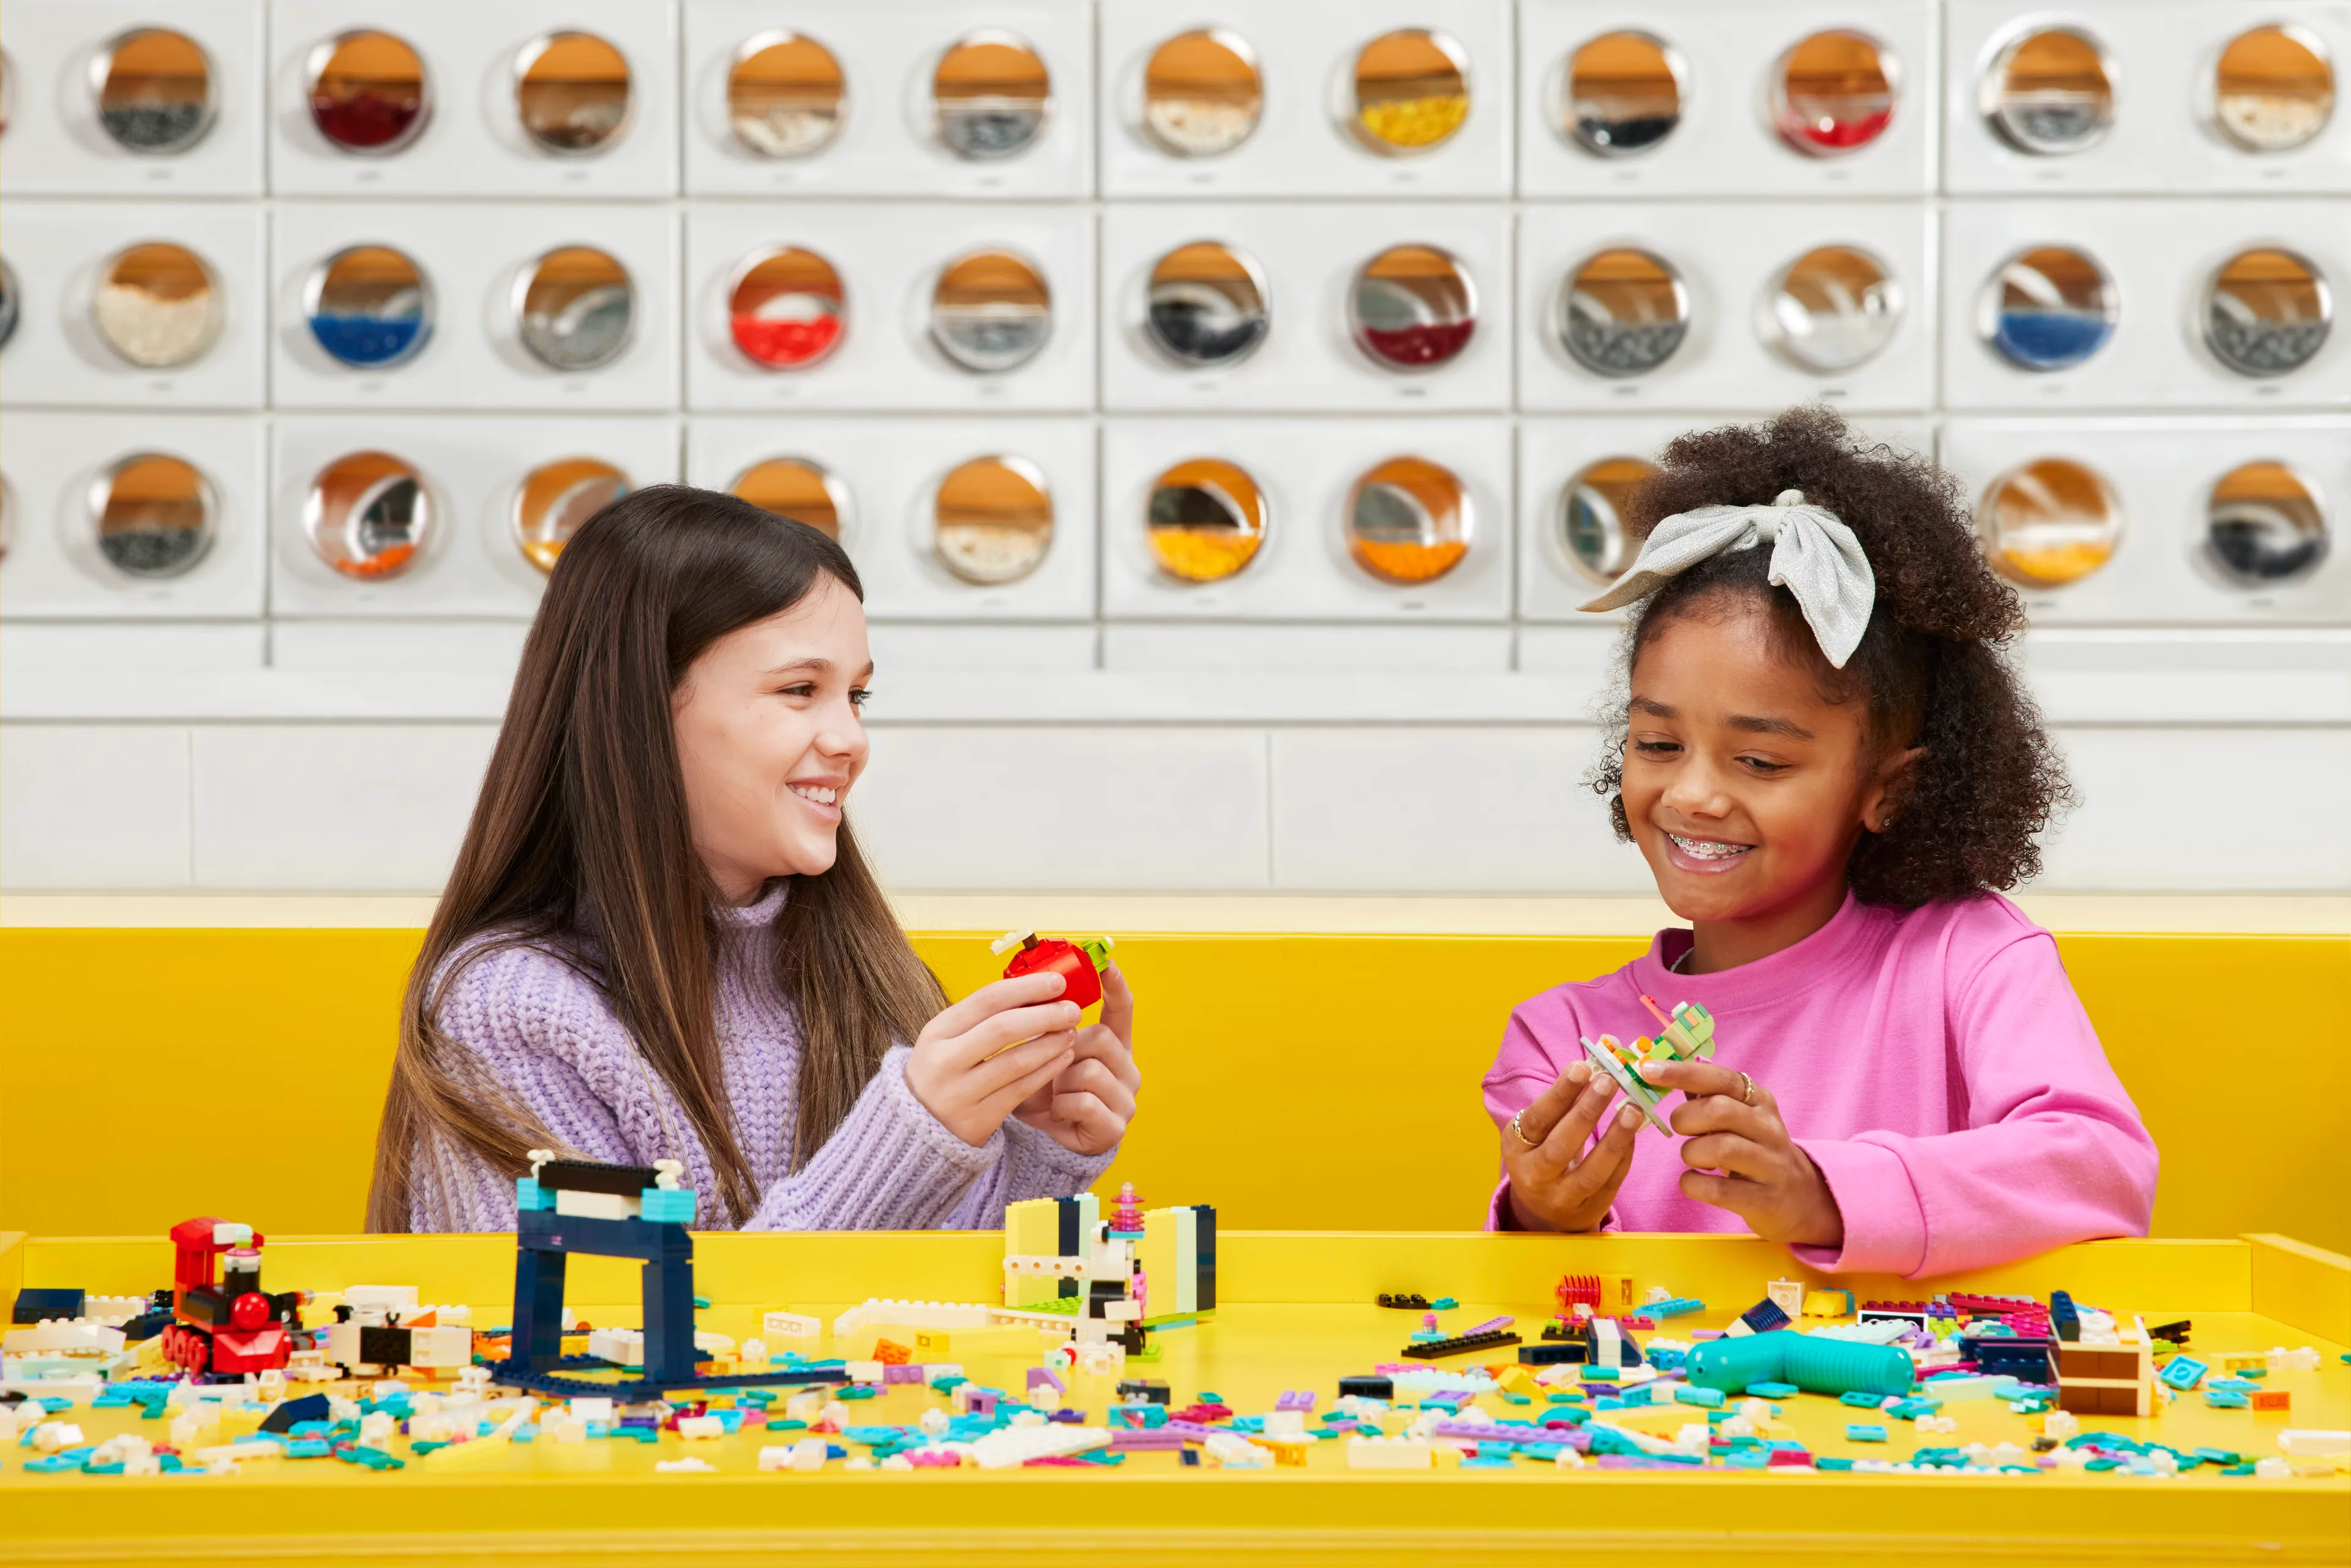 Two girls playing with bricks at a table